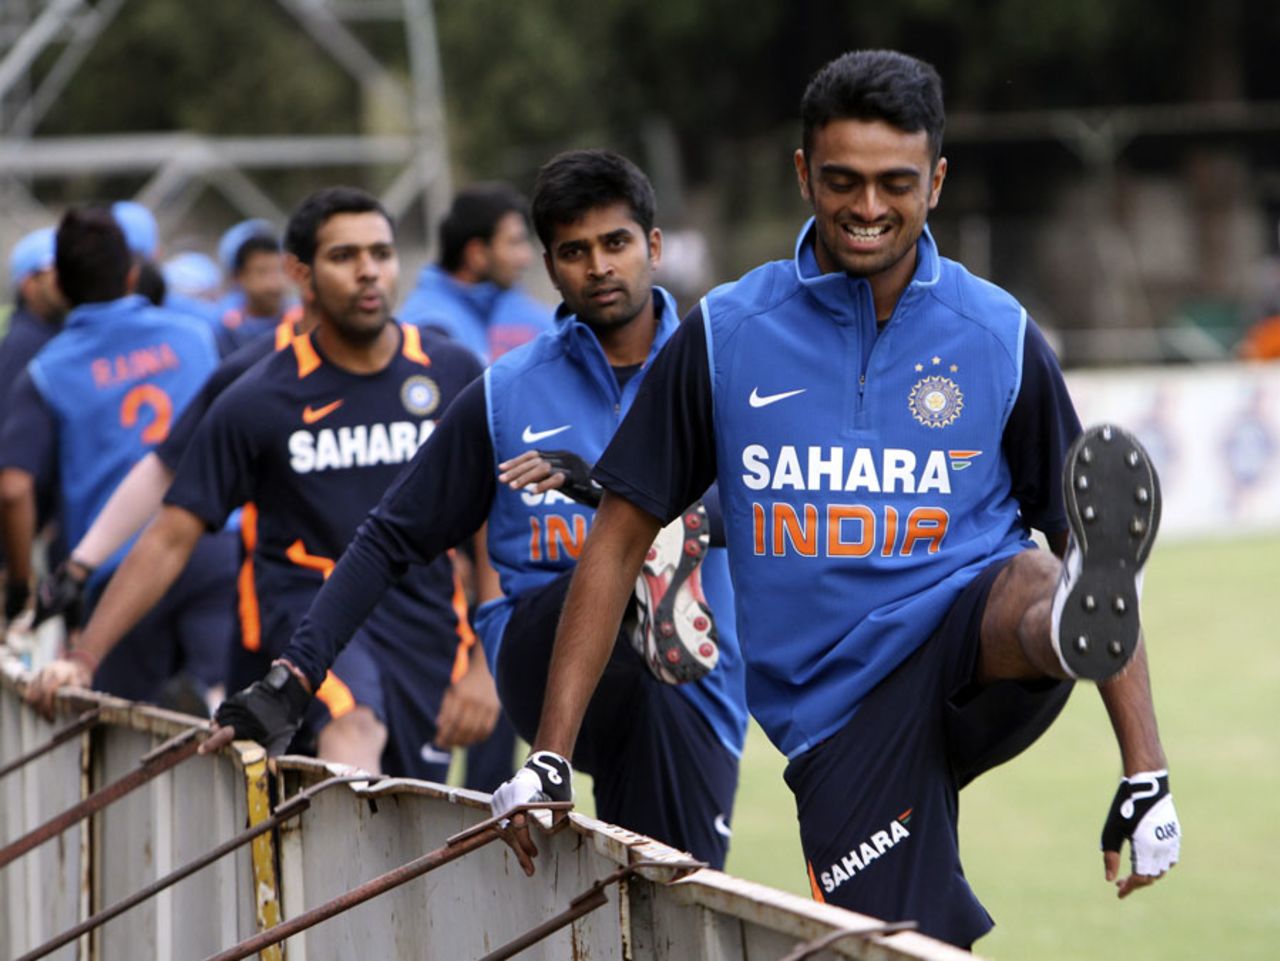 Jaydev Unadkat, Vinay Kumar and Rohit Sharma stretch during a practice session, Harare, July 22, 2013